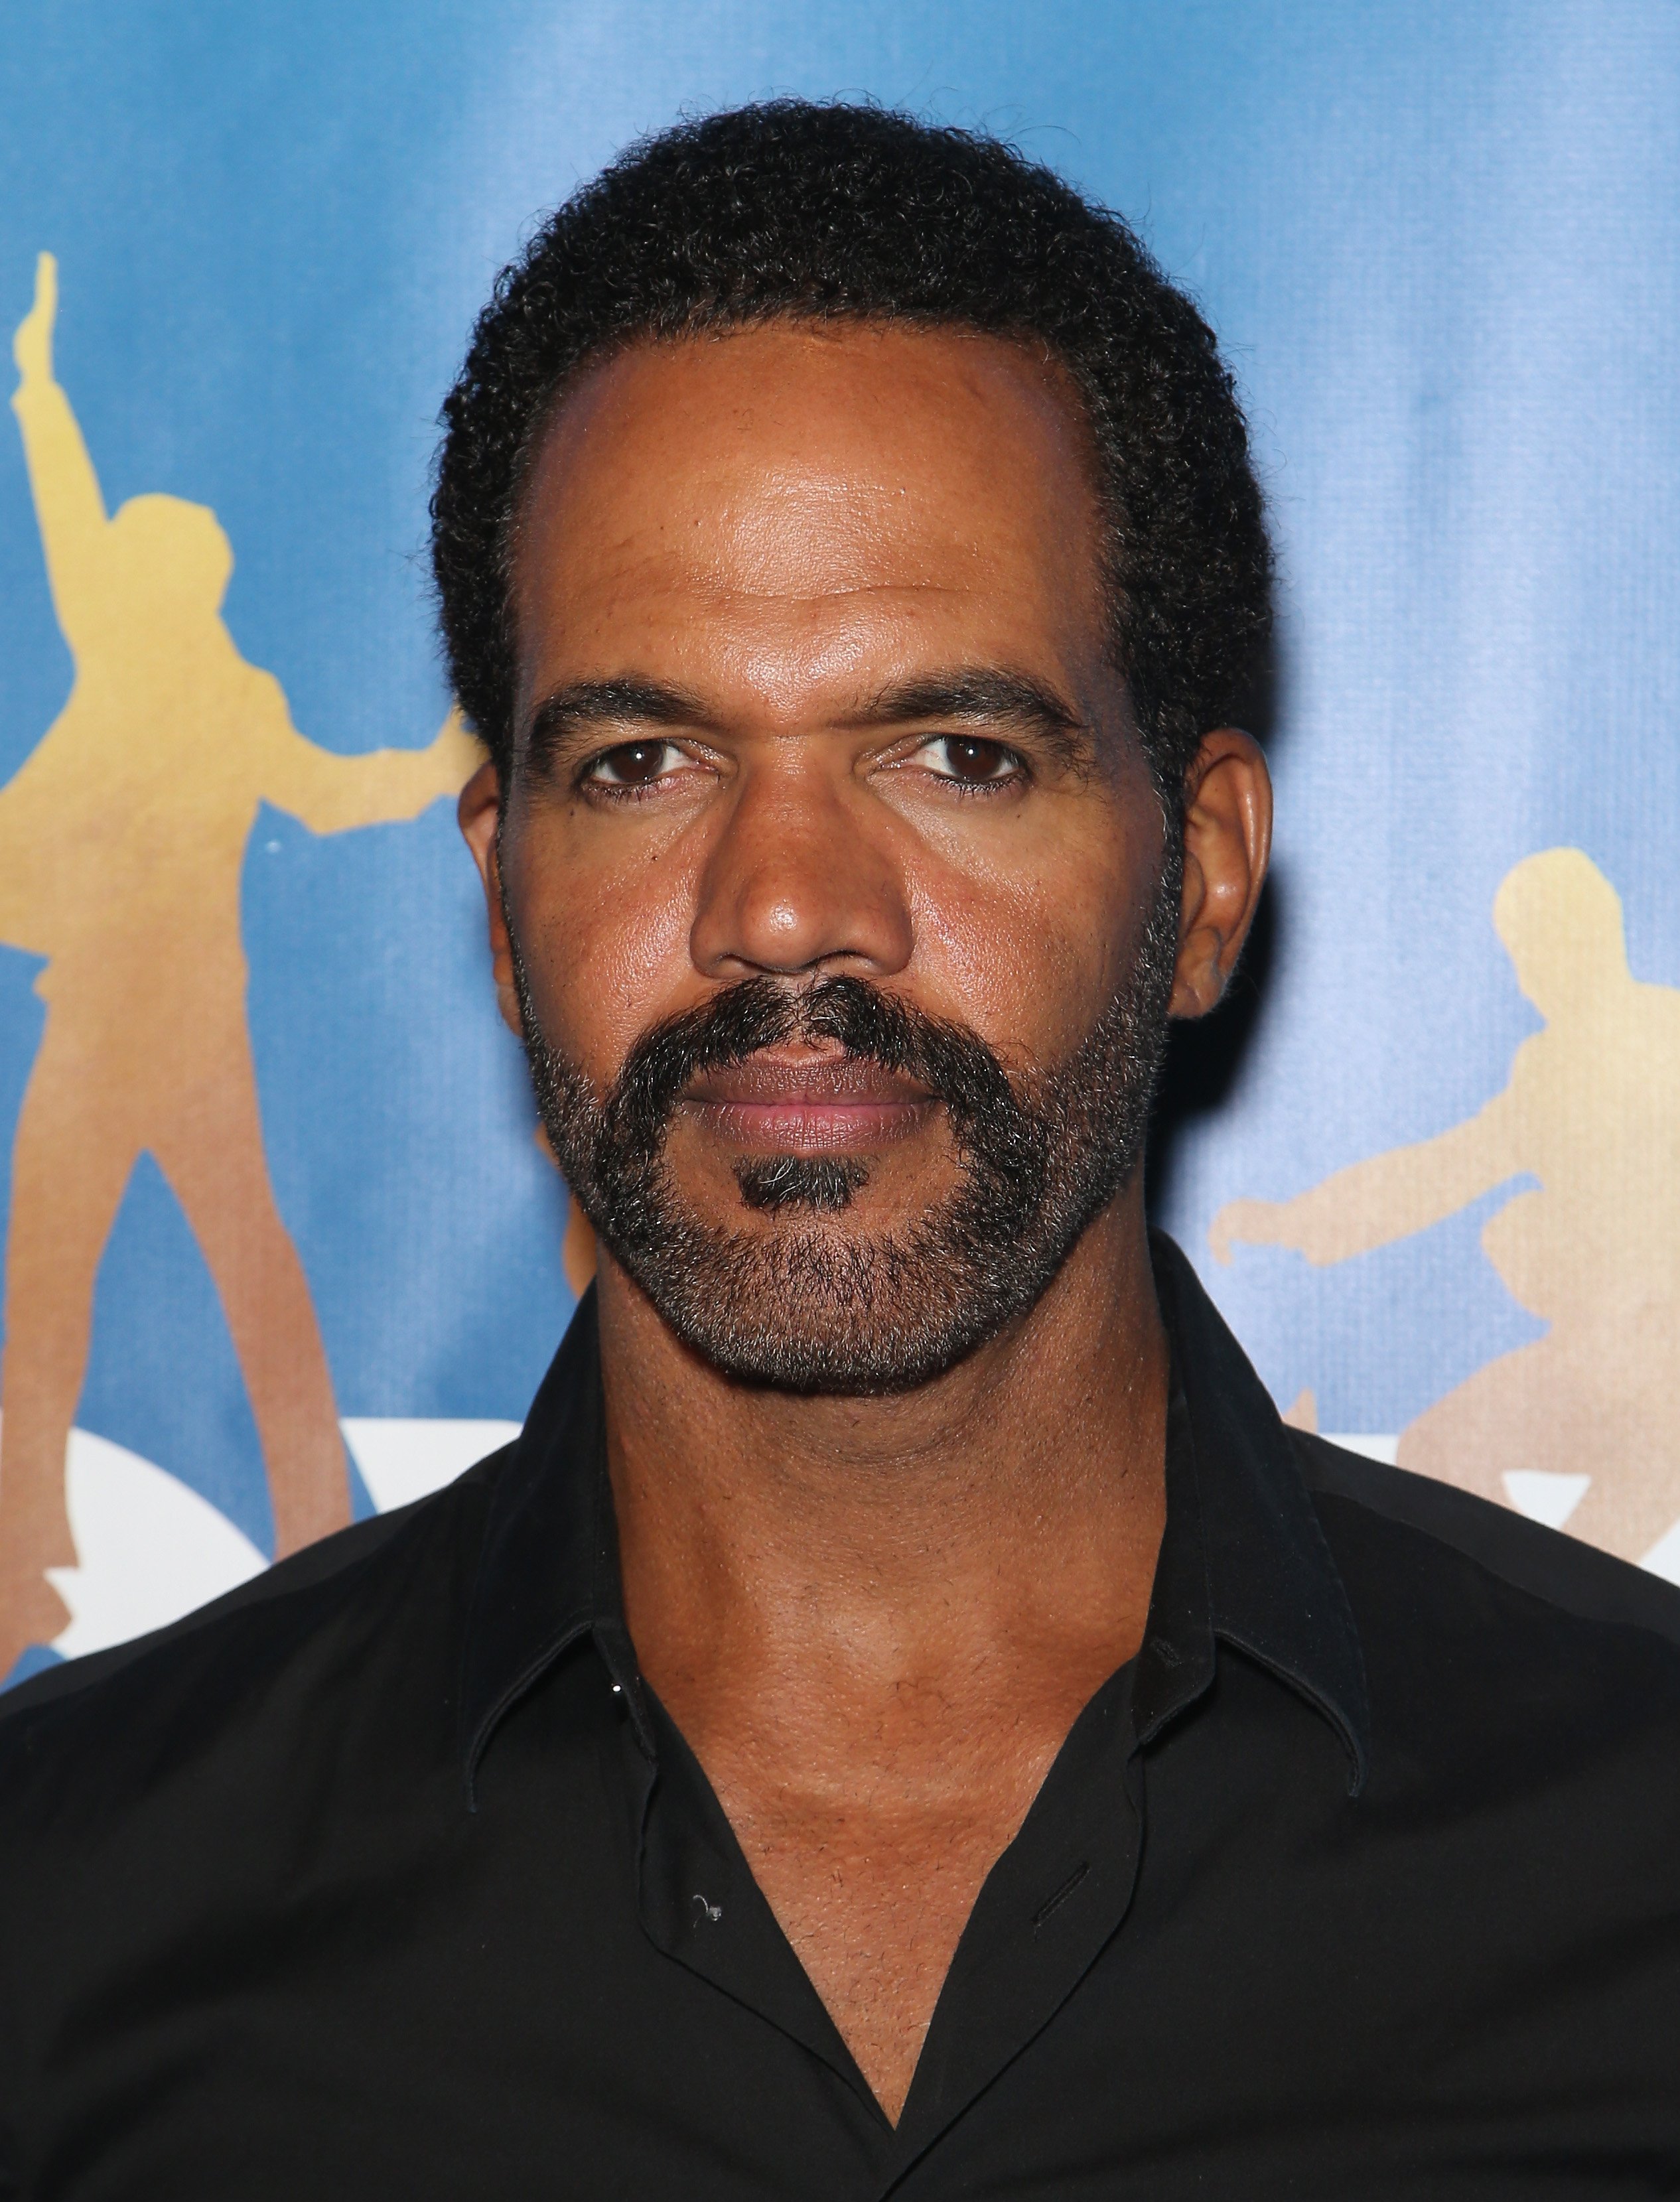  Kristoff St. John at The Mirage Hotel & Casino on July 14, 2016 in Las Vegas, Nevada | Photo: Getty Images